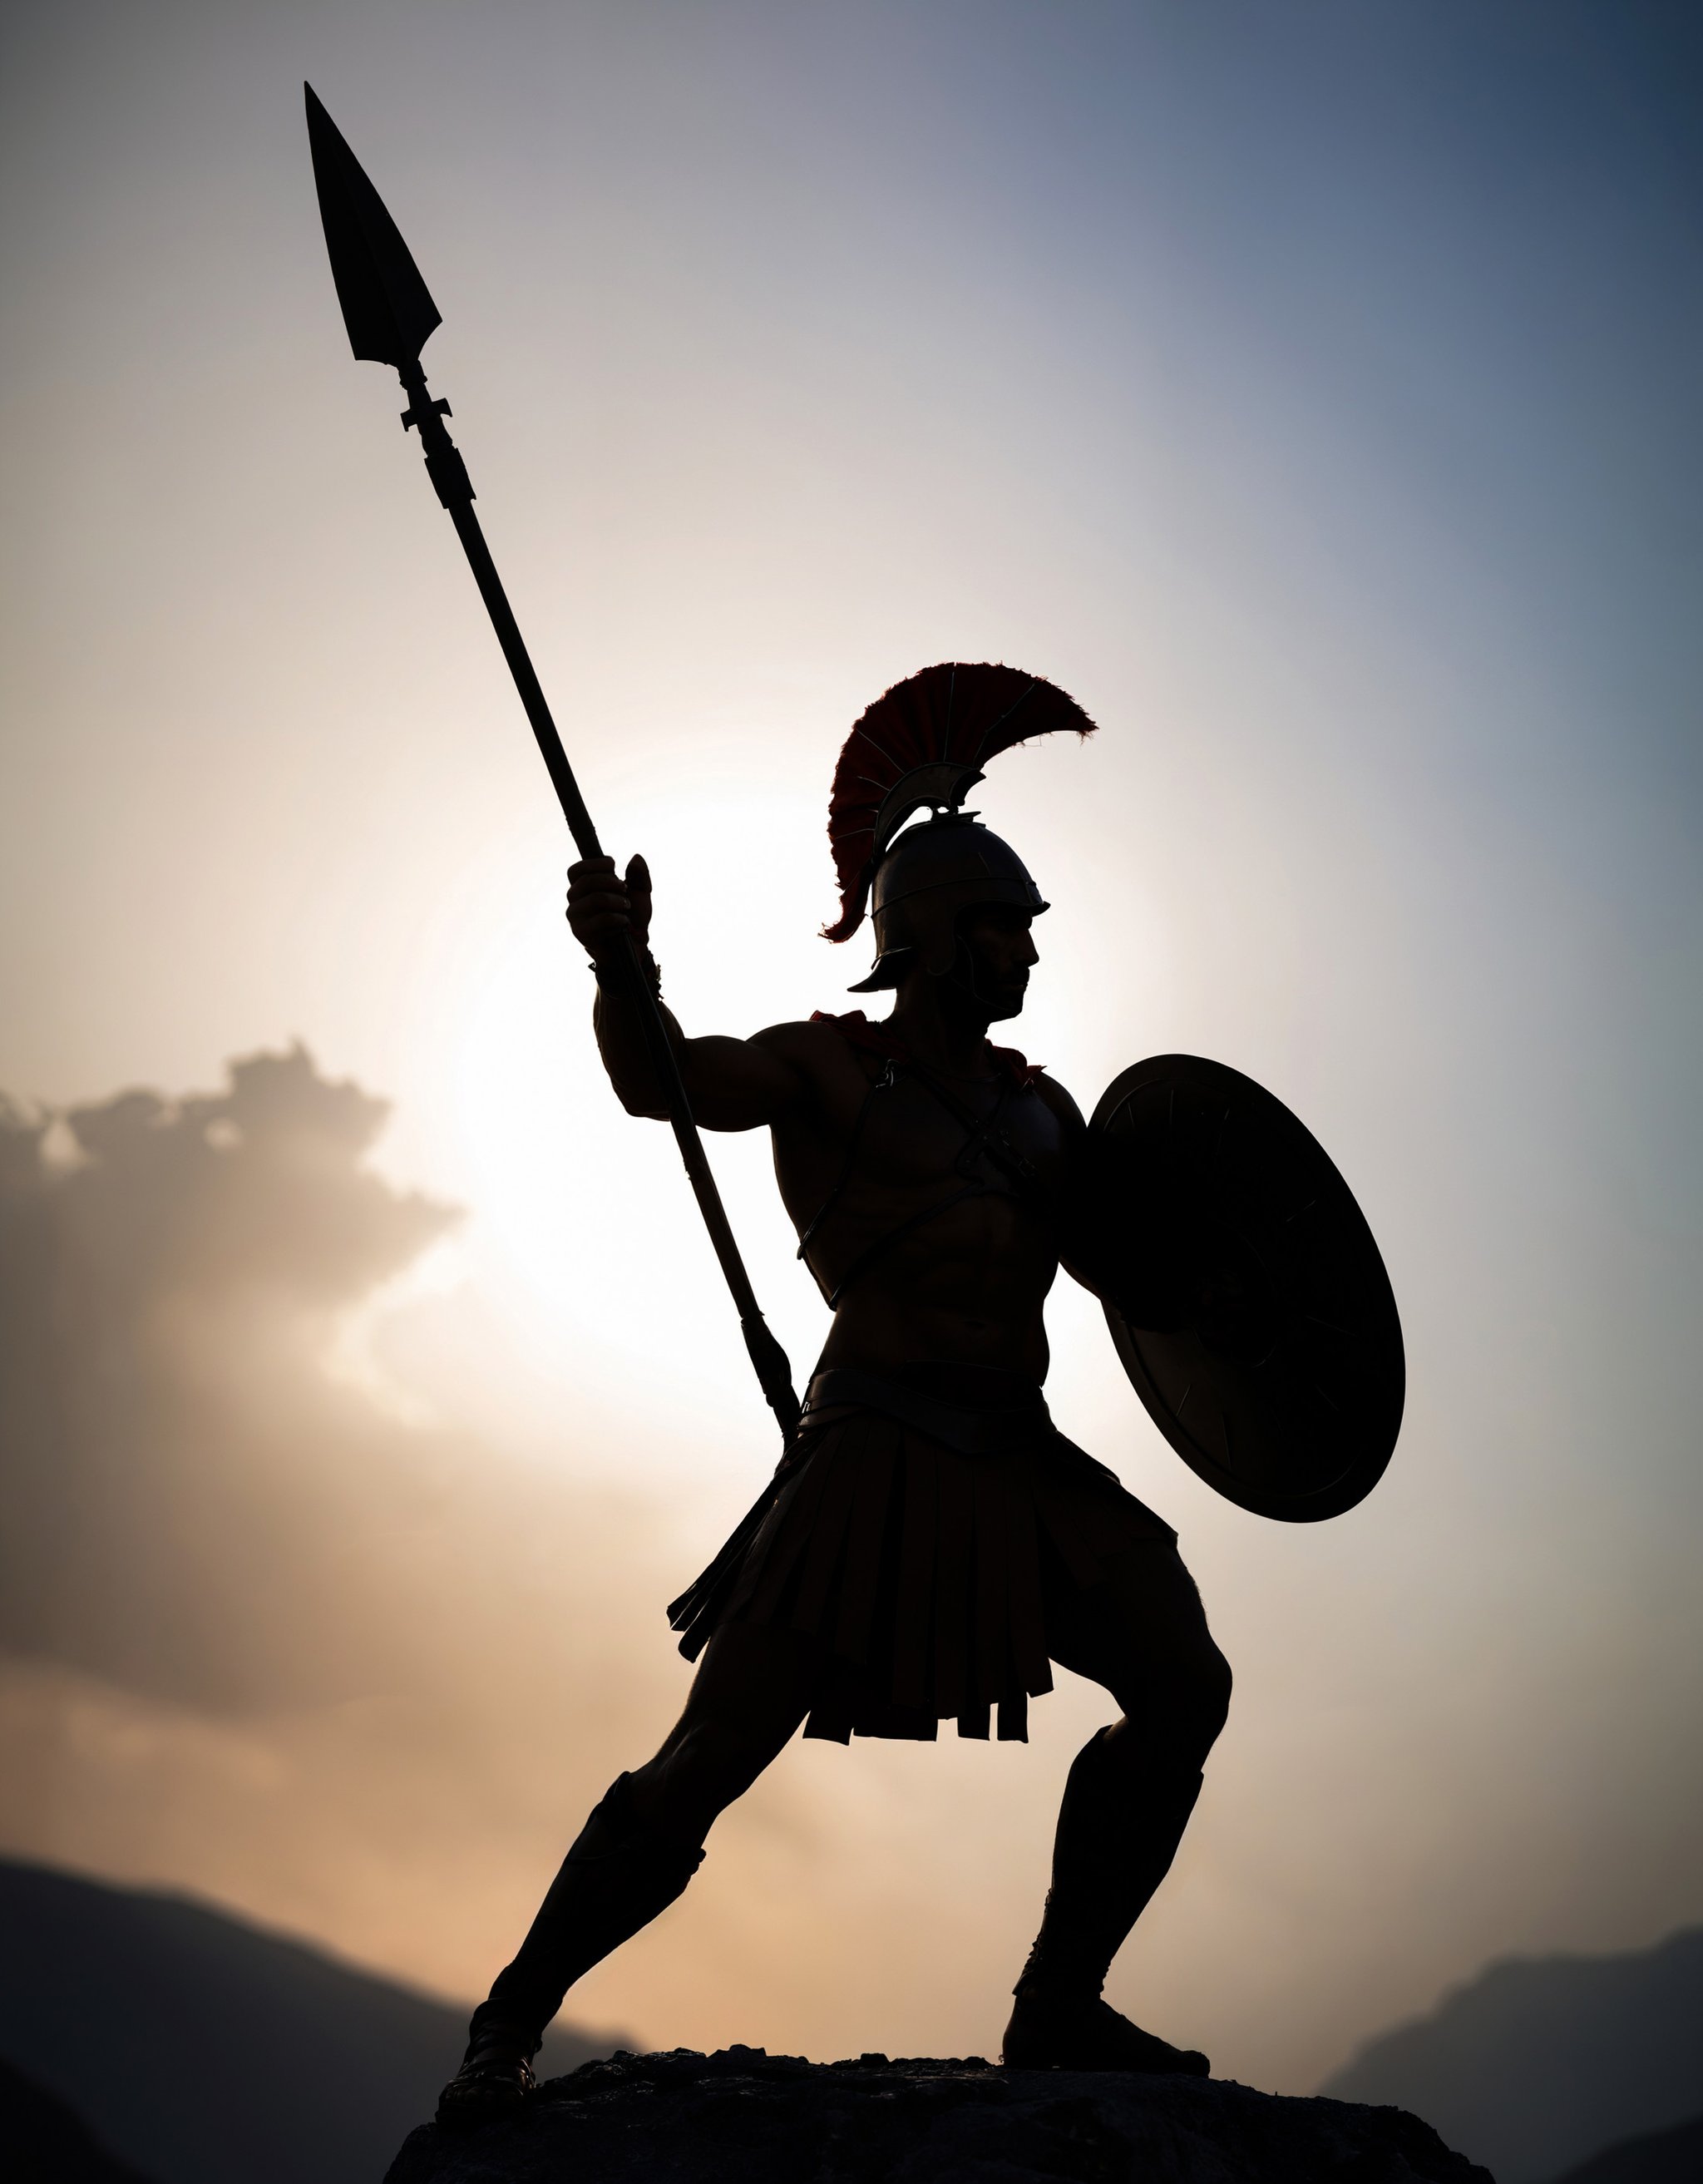 zavy-slhtt, silhouette of a hoplite defending the pass of thermopylae, greek hoplite, ancient greek infantry, action pose, 100mm f/2.8 macro lens,